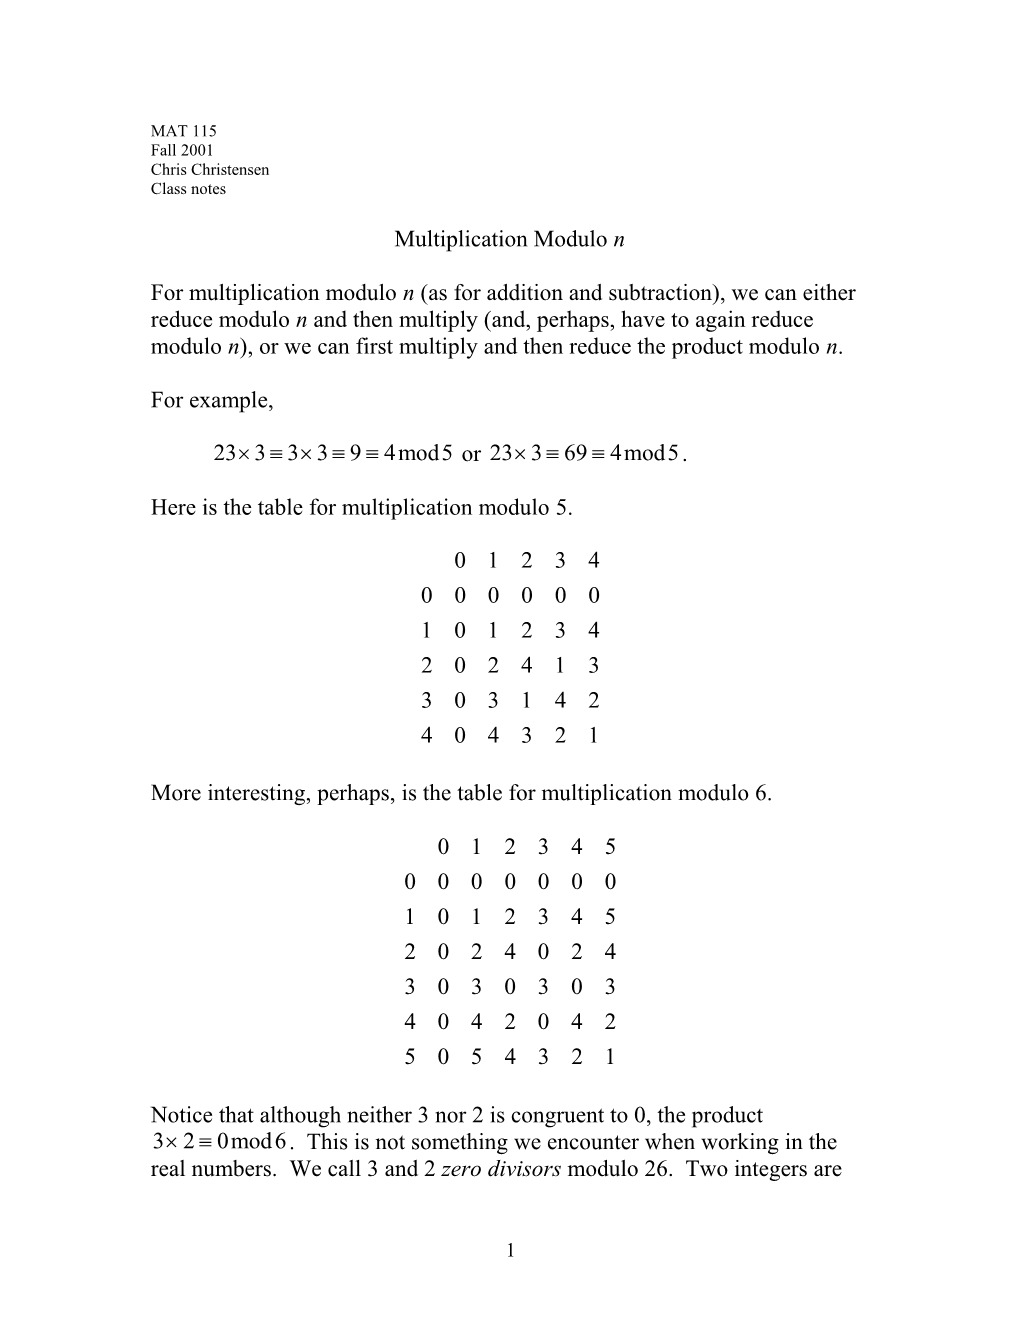 Here Is the Table for Multiplication Modulo 5